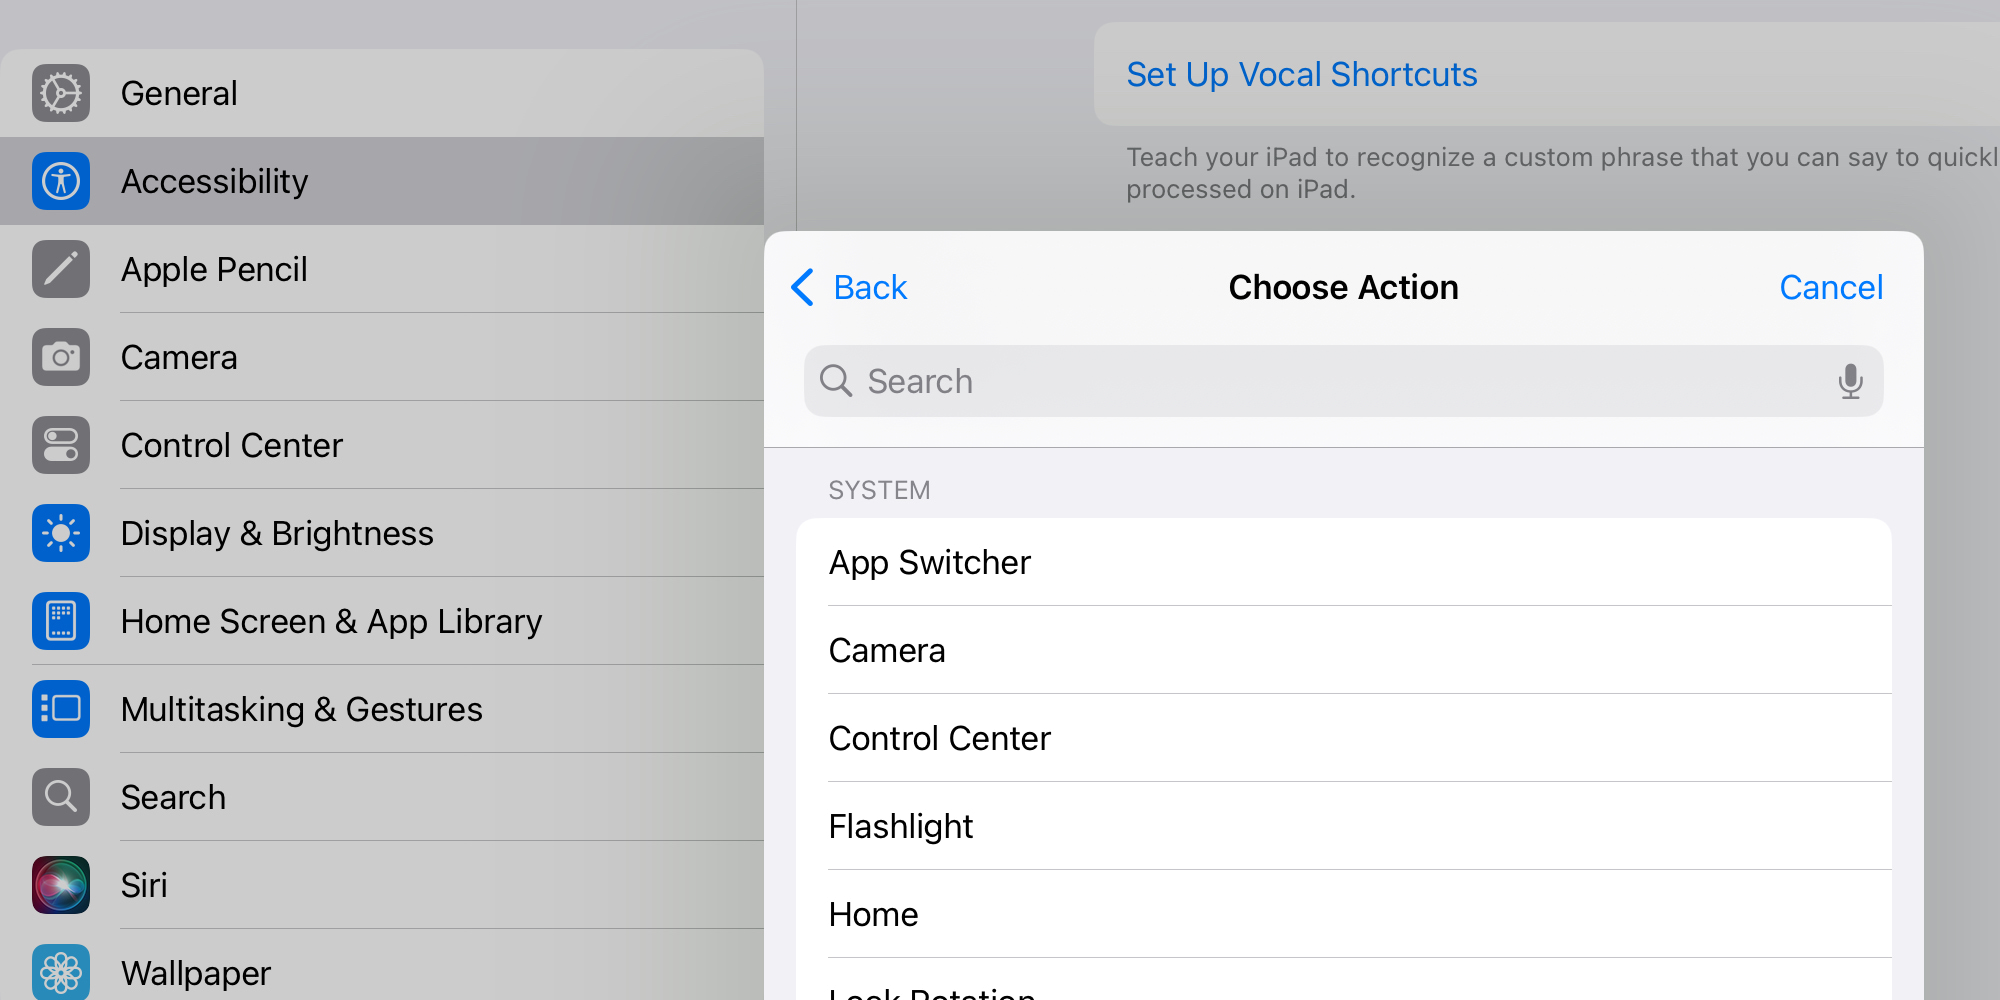 Choosing an action for your Vocal Shortcut